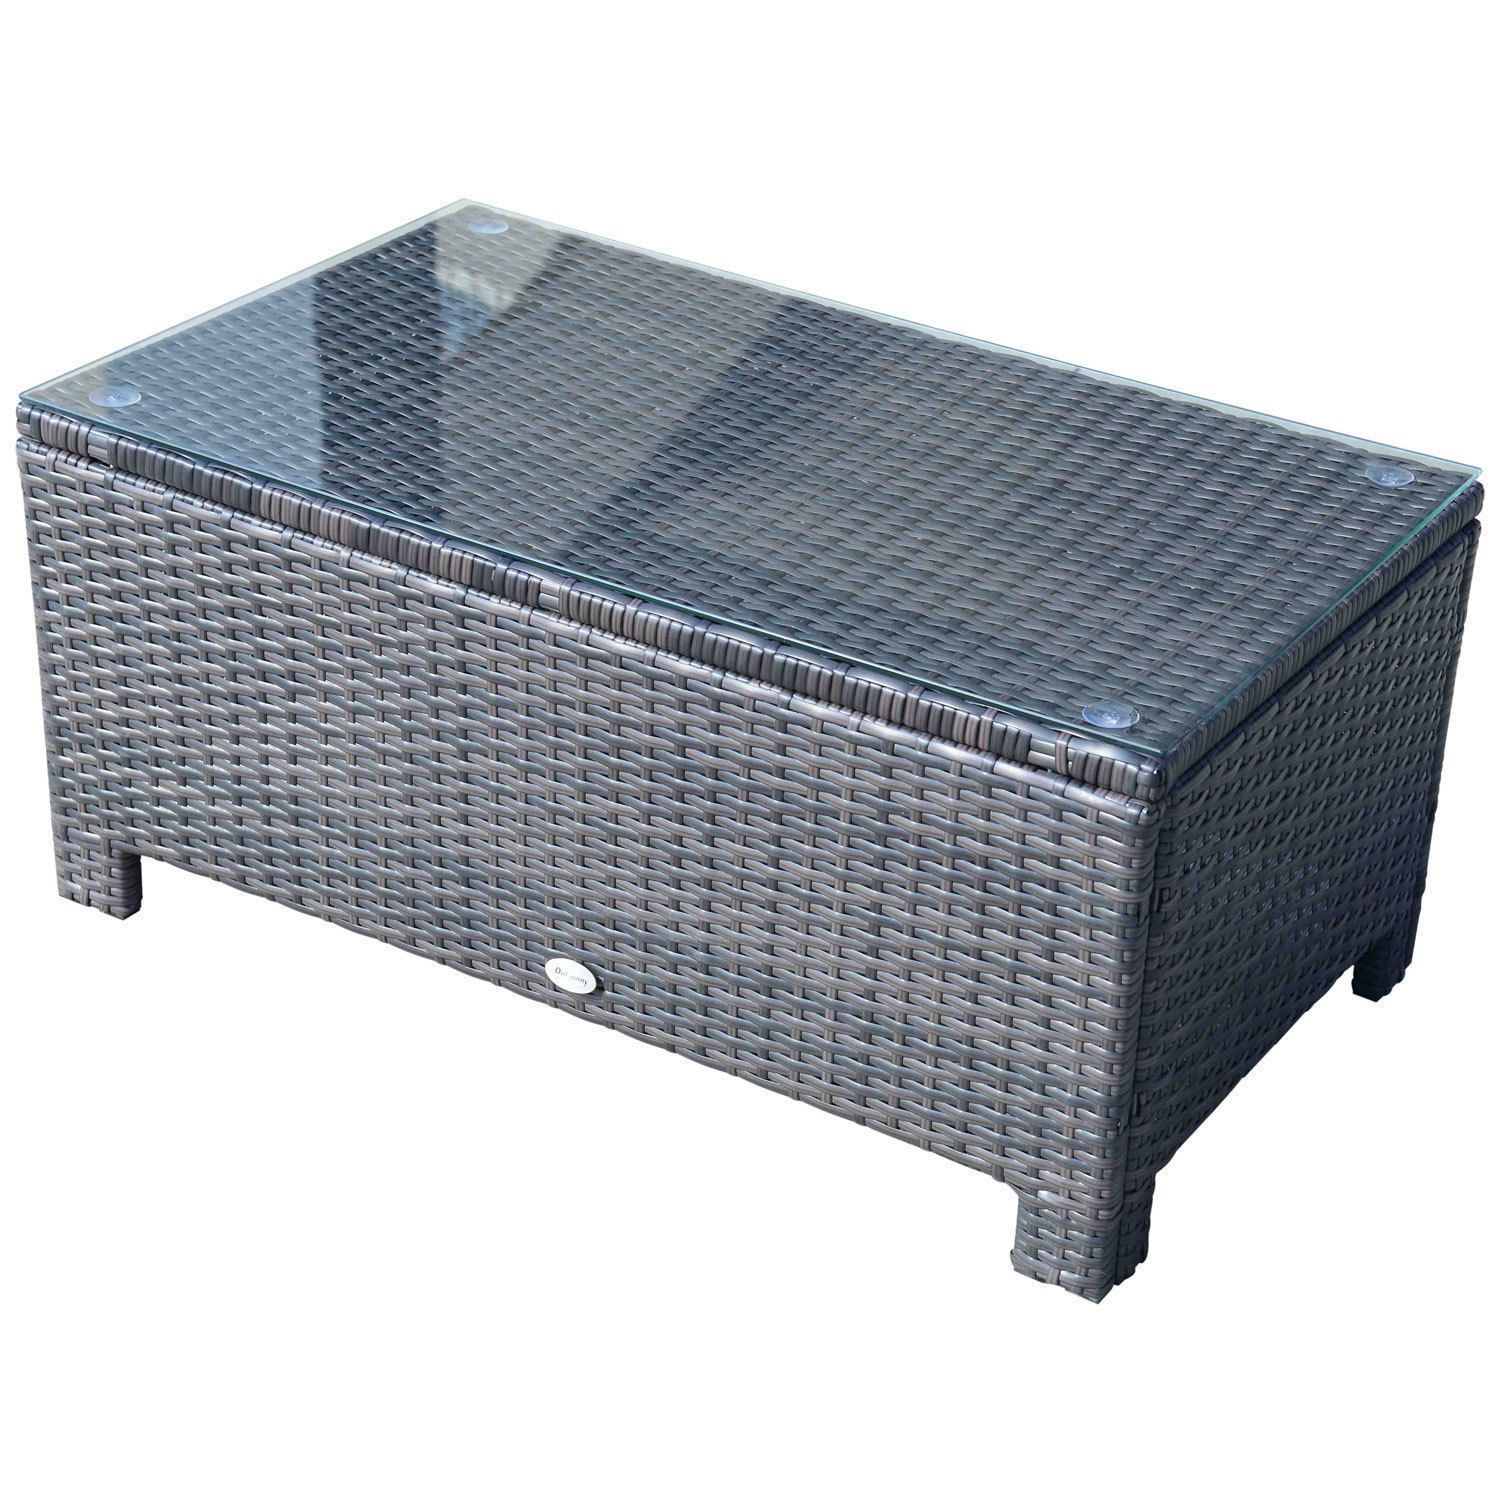 Rattan Outdoor Garden Furniture Weave Wicker Coffee Table – Black/grey For 4pcs Rattan Patio Coffee Tables (View 19 of 20)